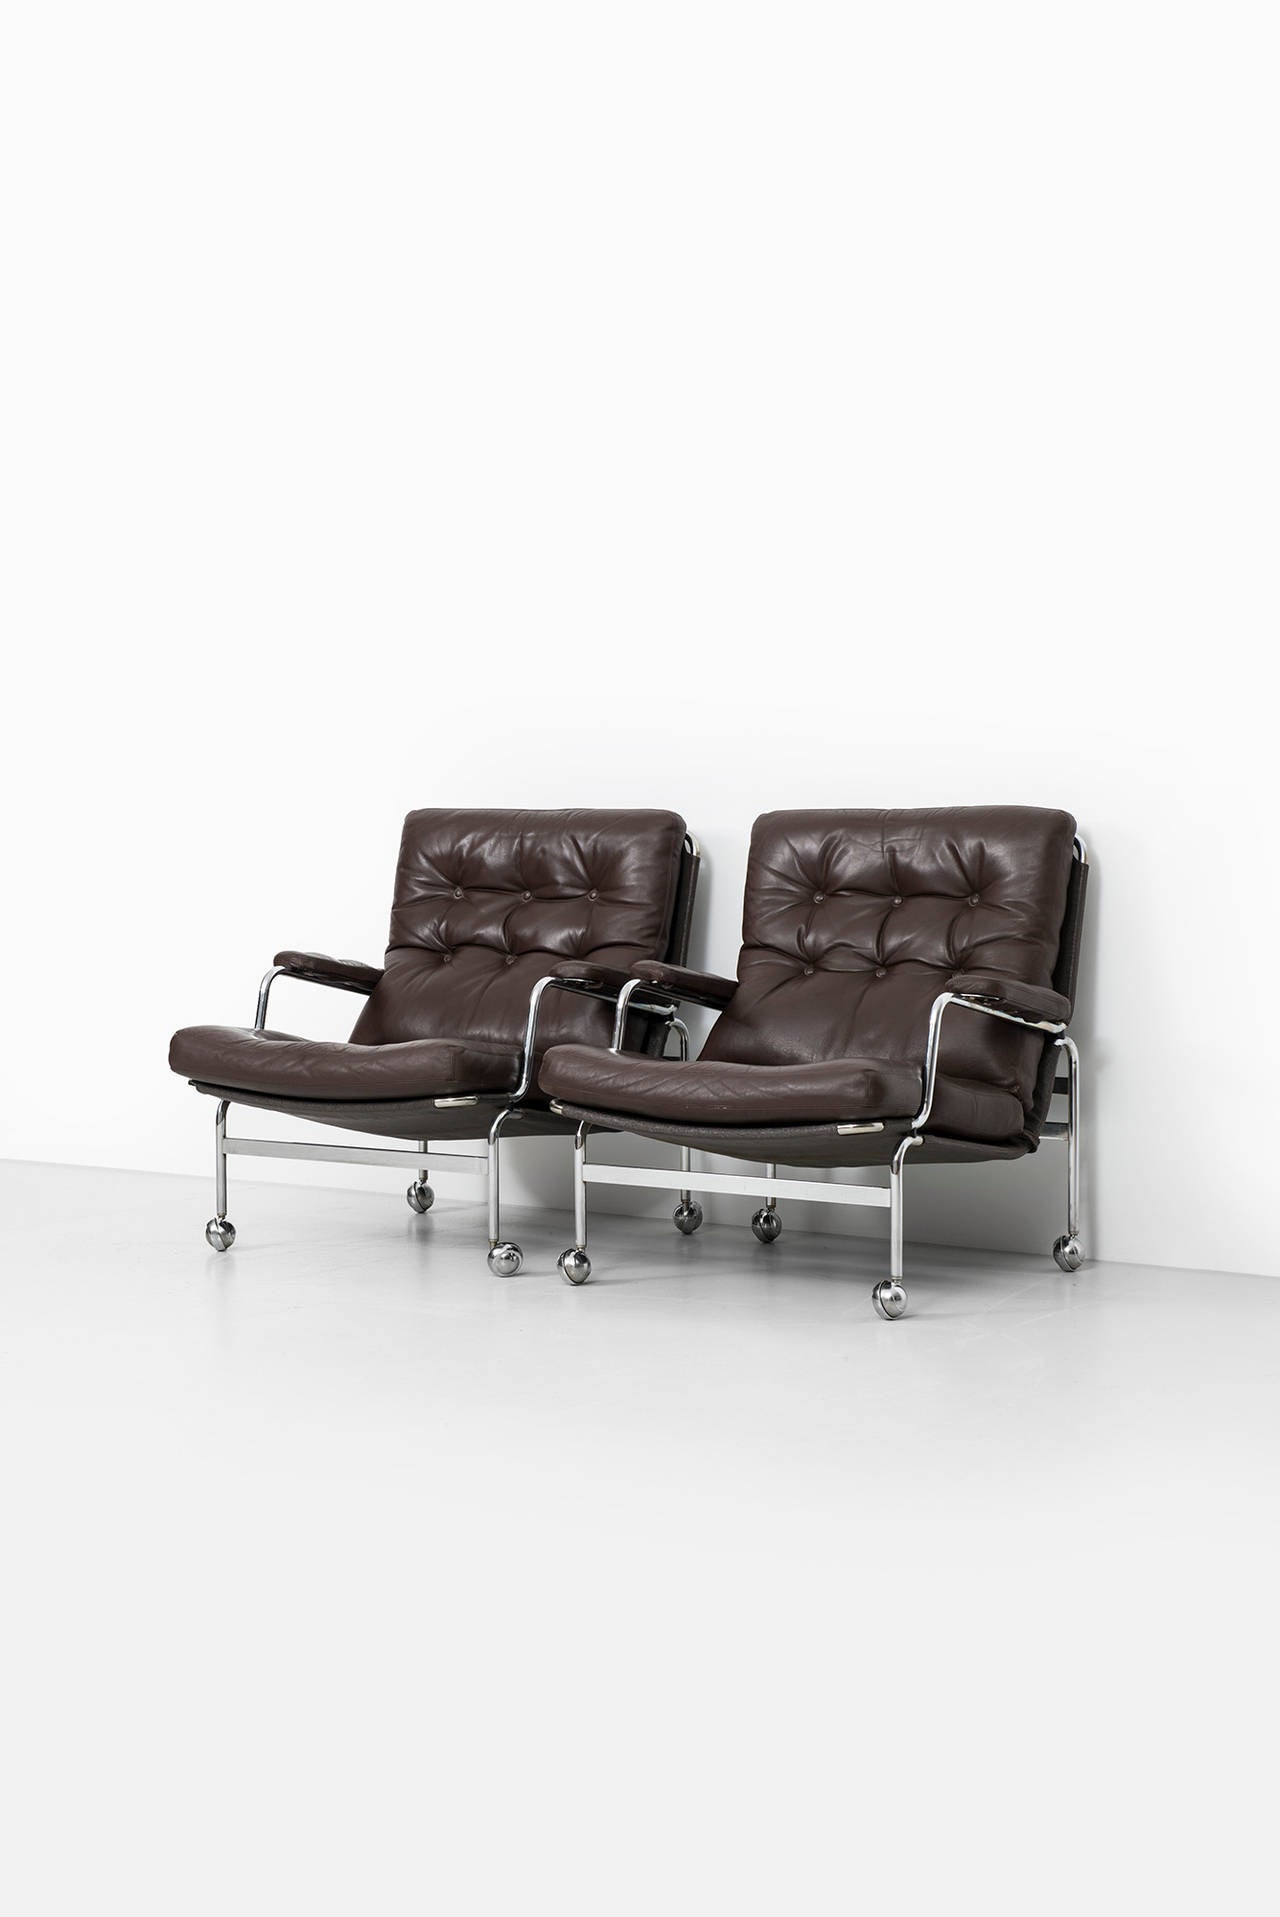 Pair of easy chairs model Karin designed by Bruno Mathsson. Produced by DUX in Sweden.